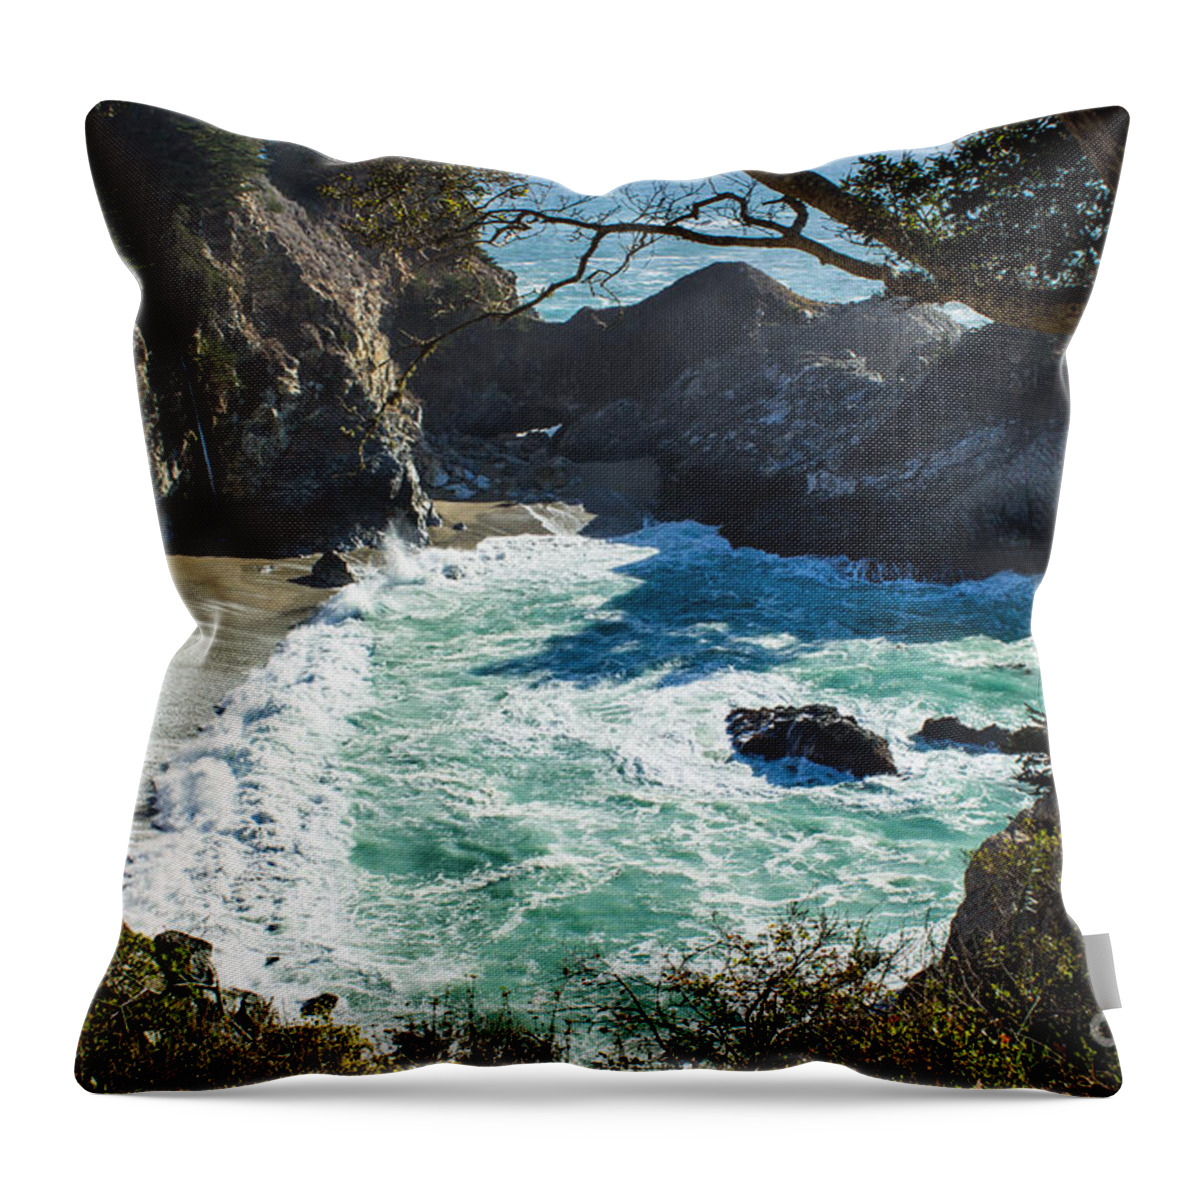 Mcway Falls Throw Pillow featuring the photograph Mc Way Falls Cove by Suzanne Luft